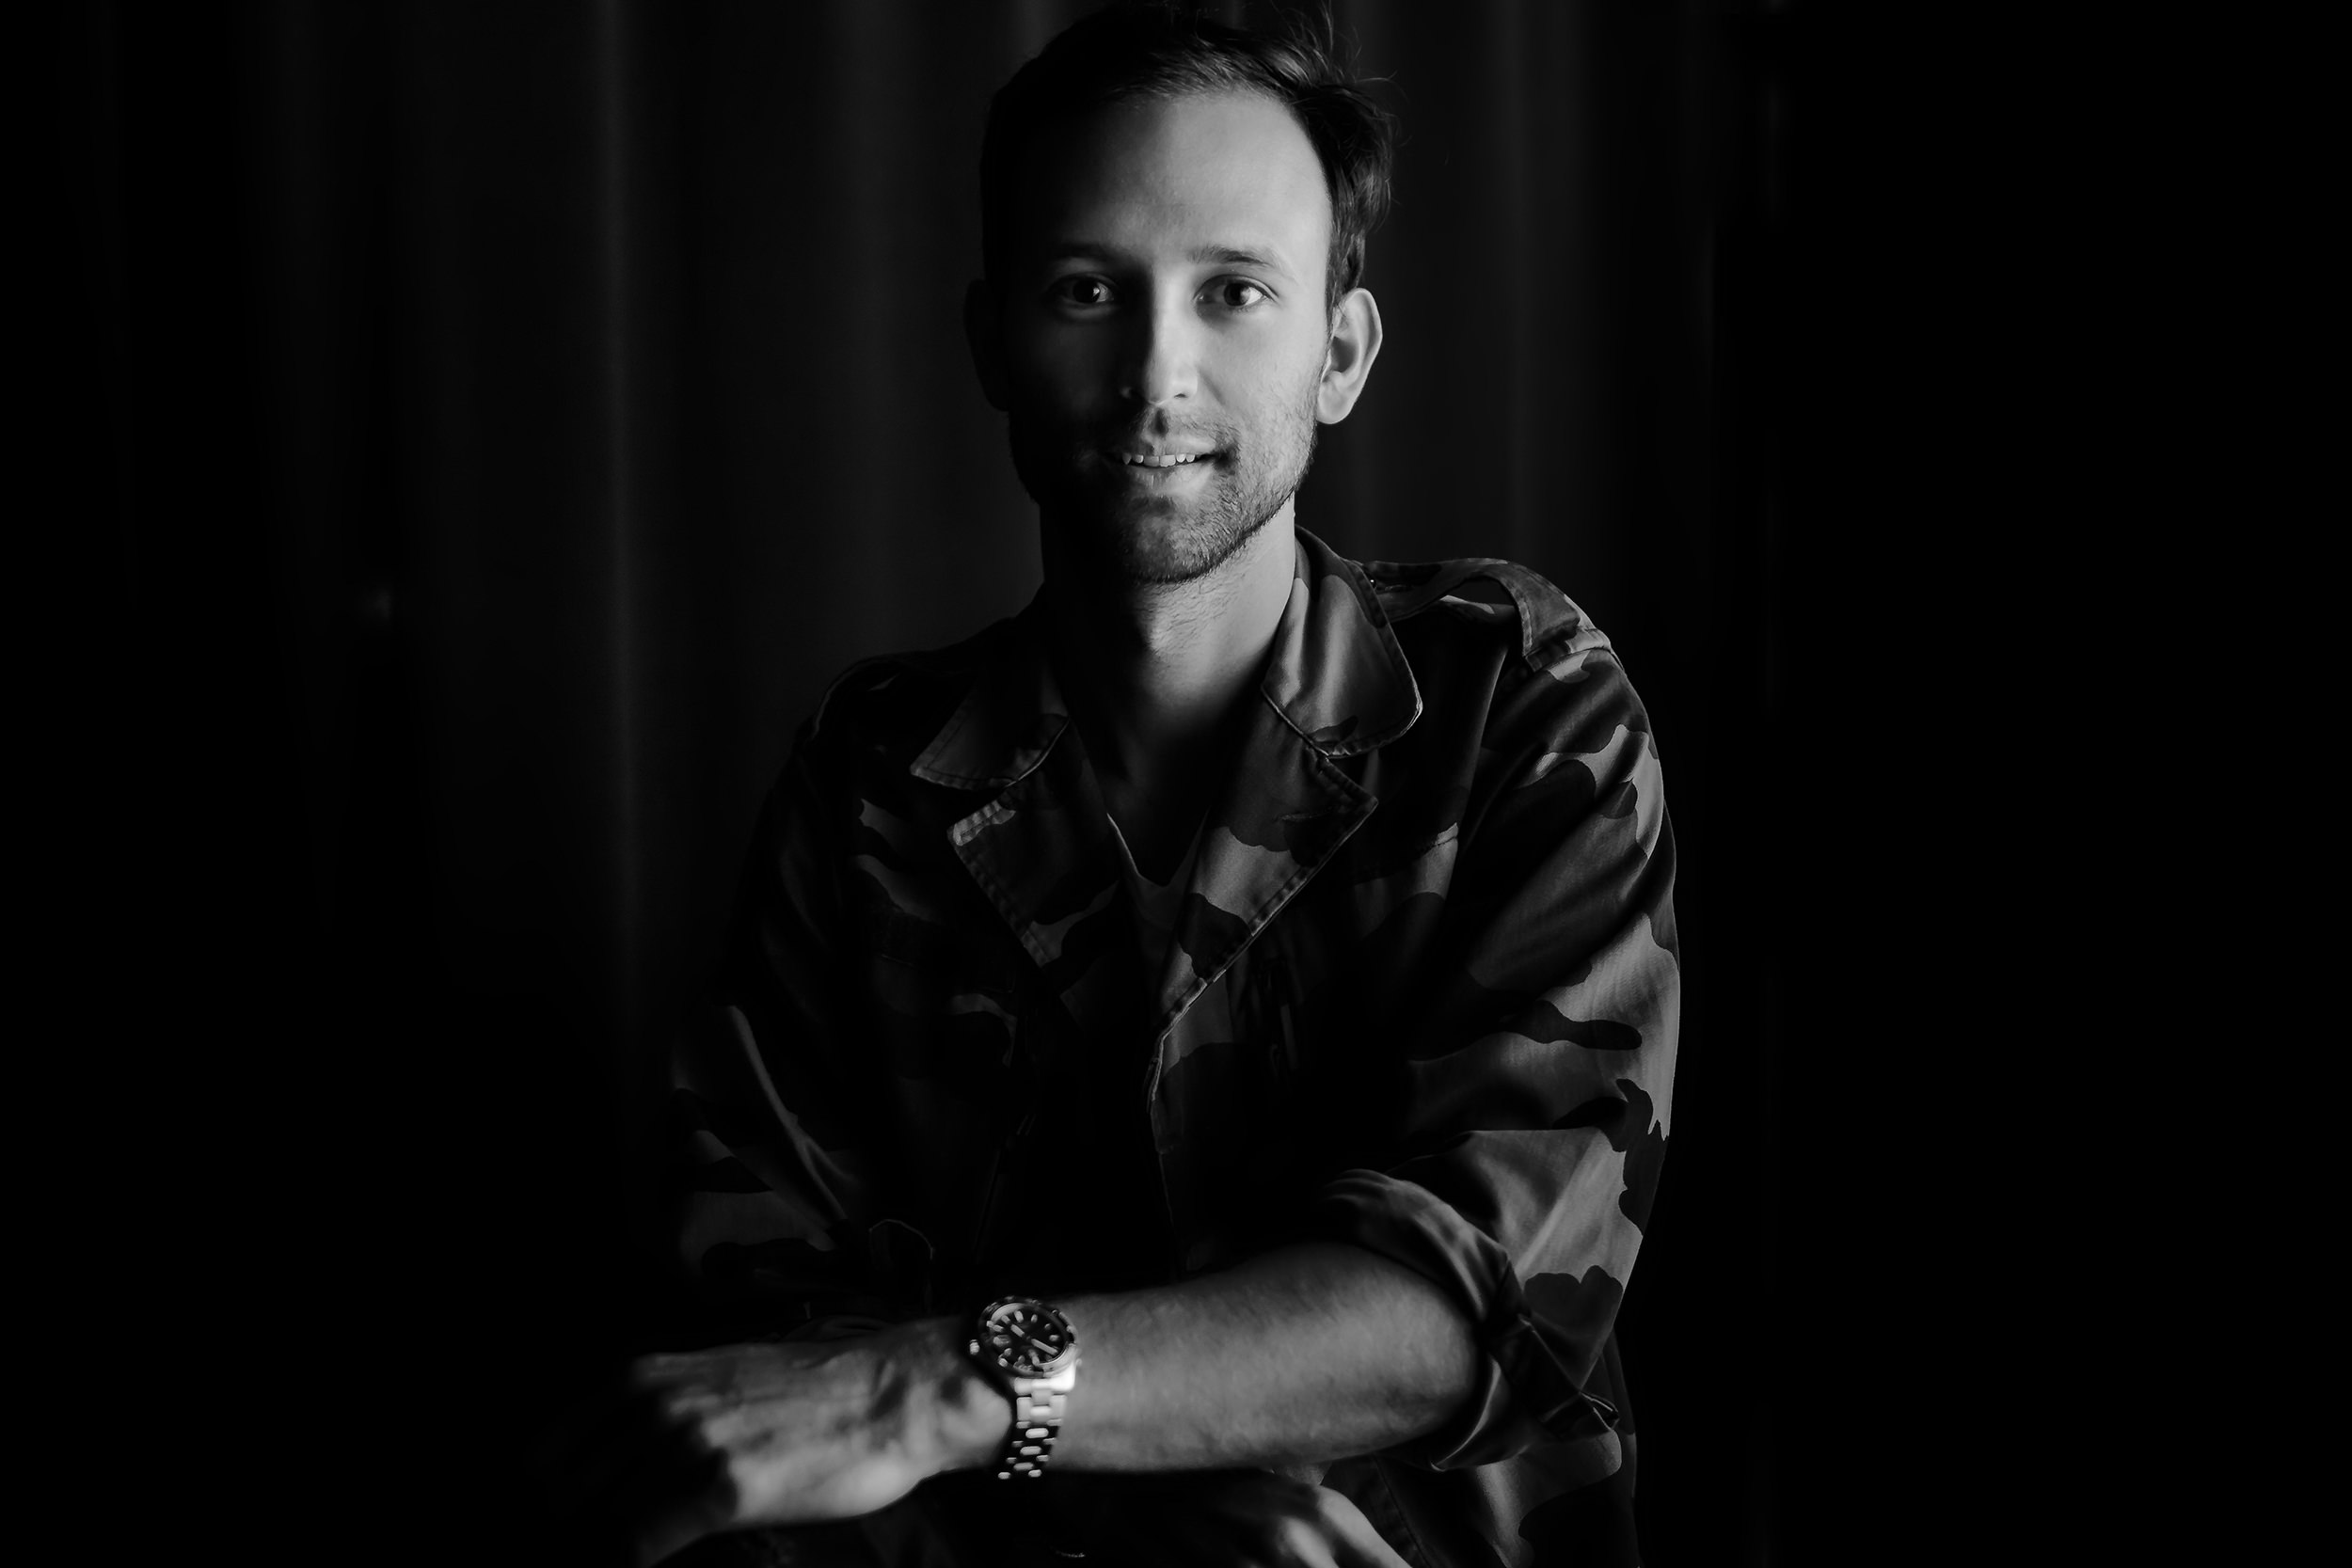 Mark Condon is the Founder of Shotkit - a widely popular wedding and portrait photography blog and website.